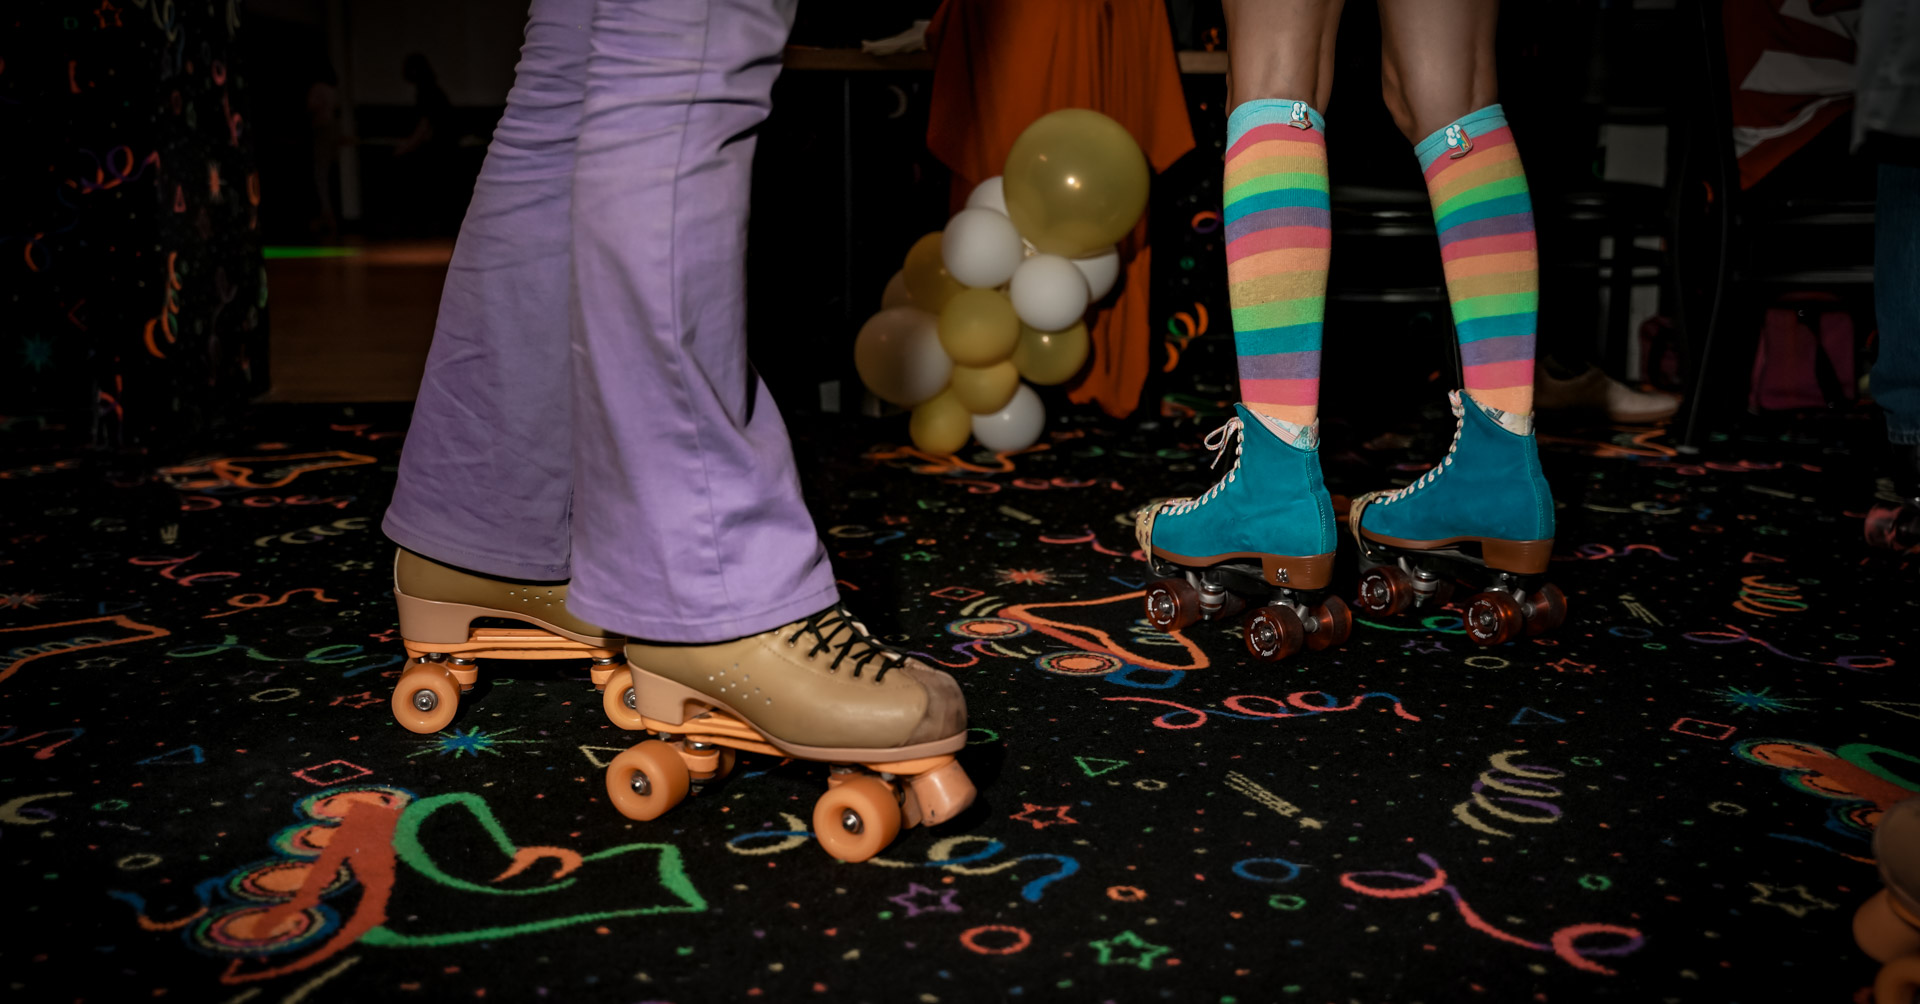 Roller skaters legs with bell bottoms and rainbow socks